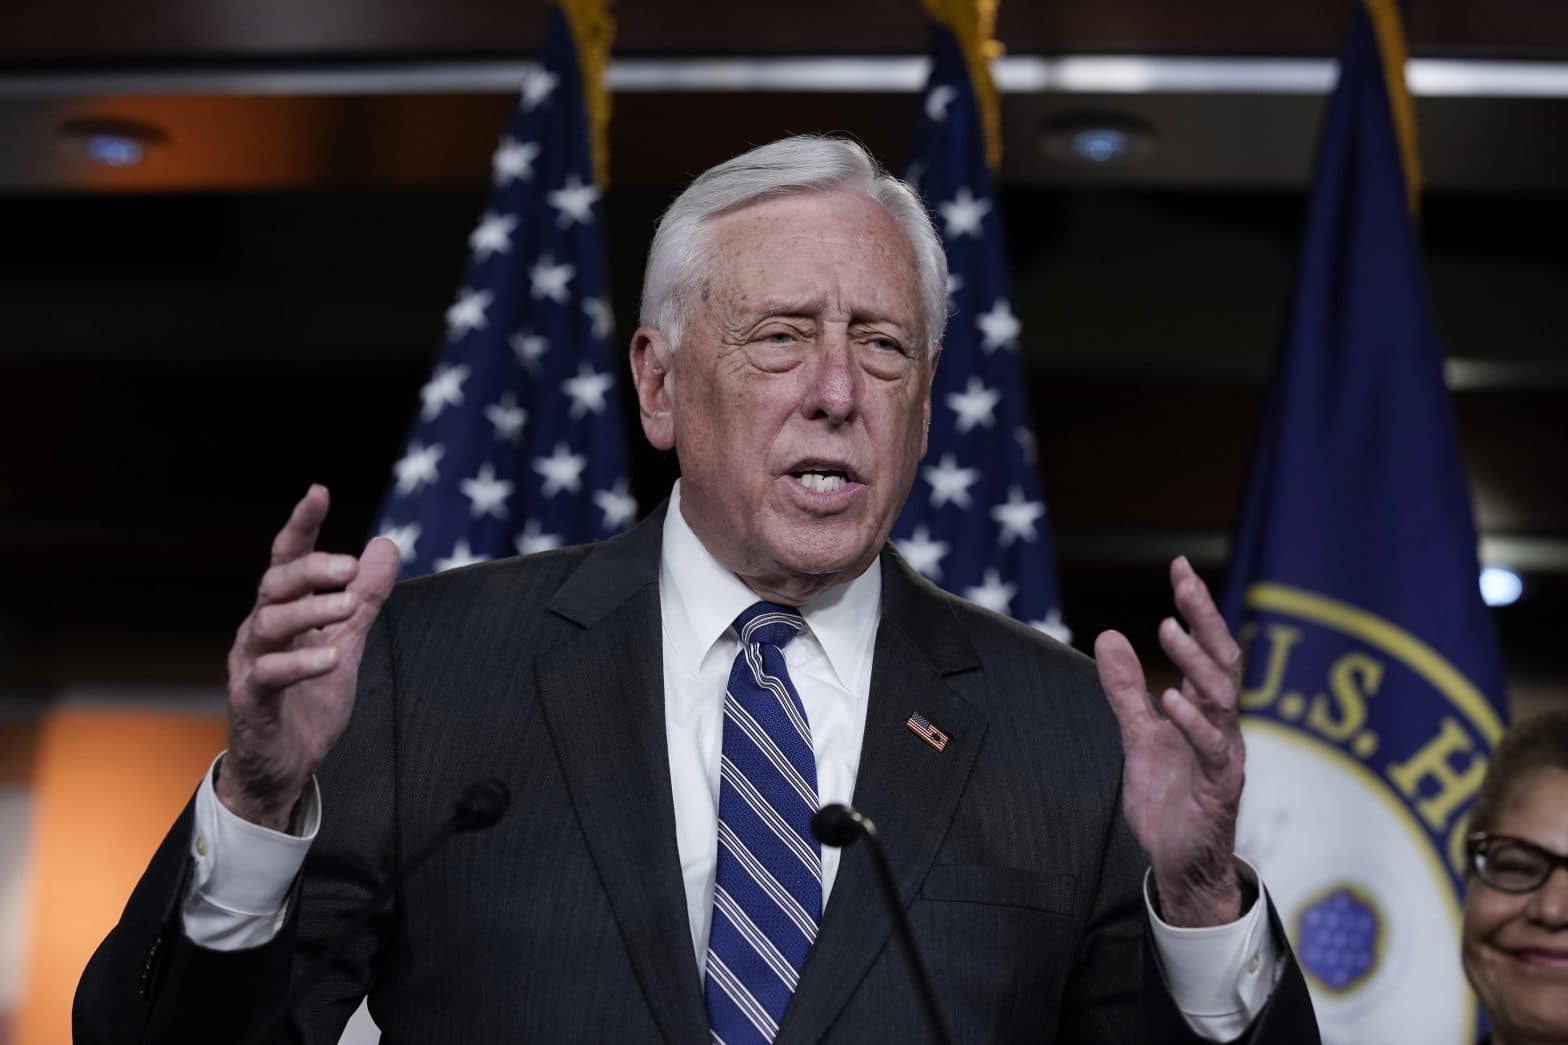 Hoyer Vows House Members Won’t Leave DC Without Relief Bill Deal